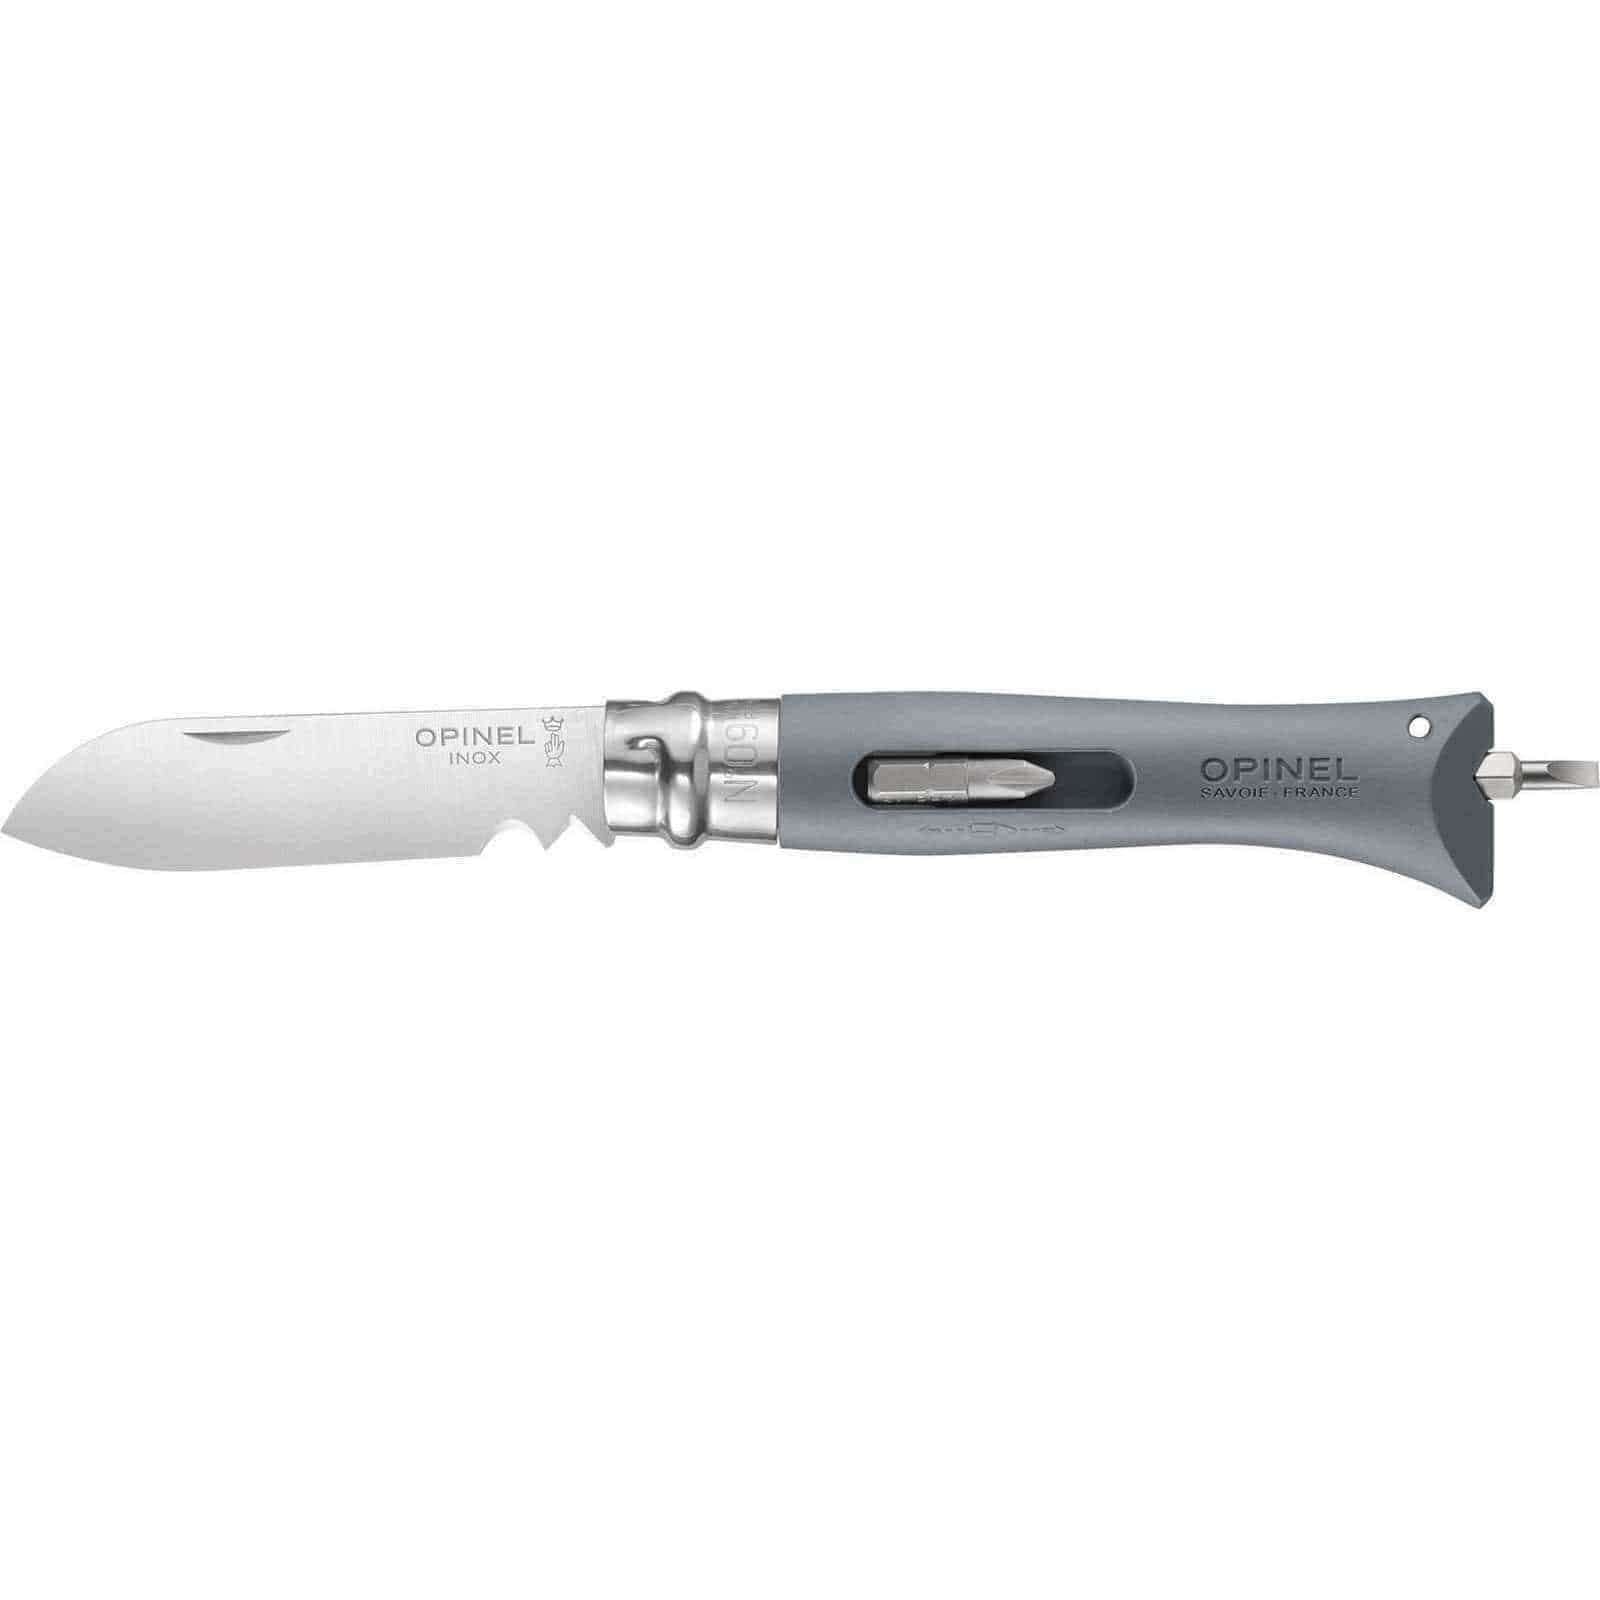 Opinel, Opinel No.9 DIY Knife, Folding Knives,Wylies Outdoor World,